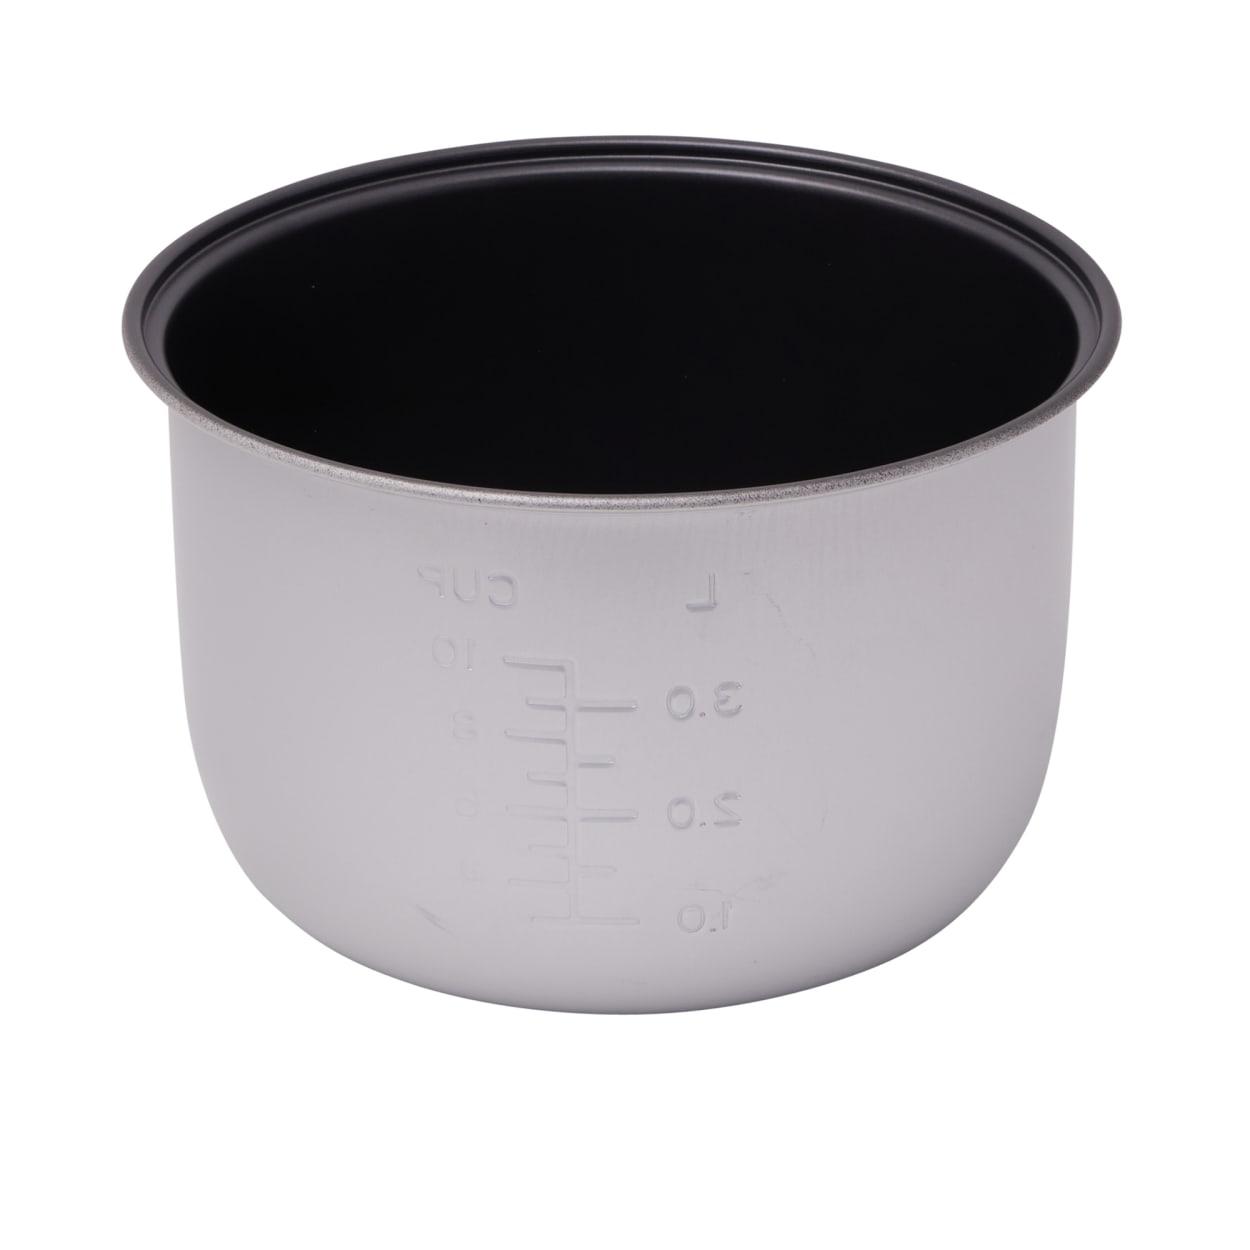 Westinghouse Rice Cooker 10 Cup Image 5